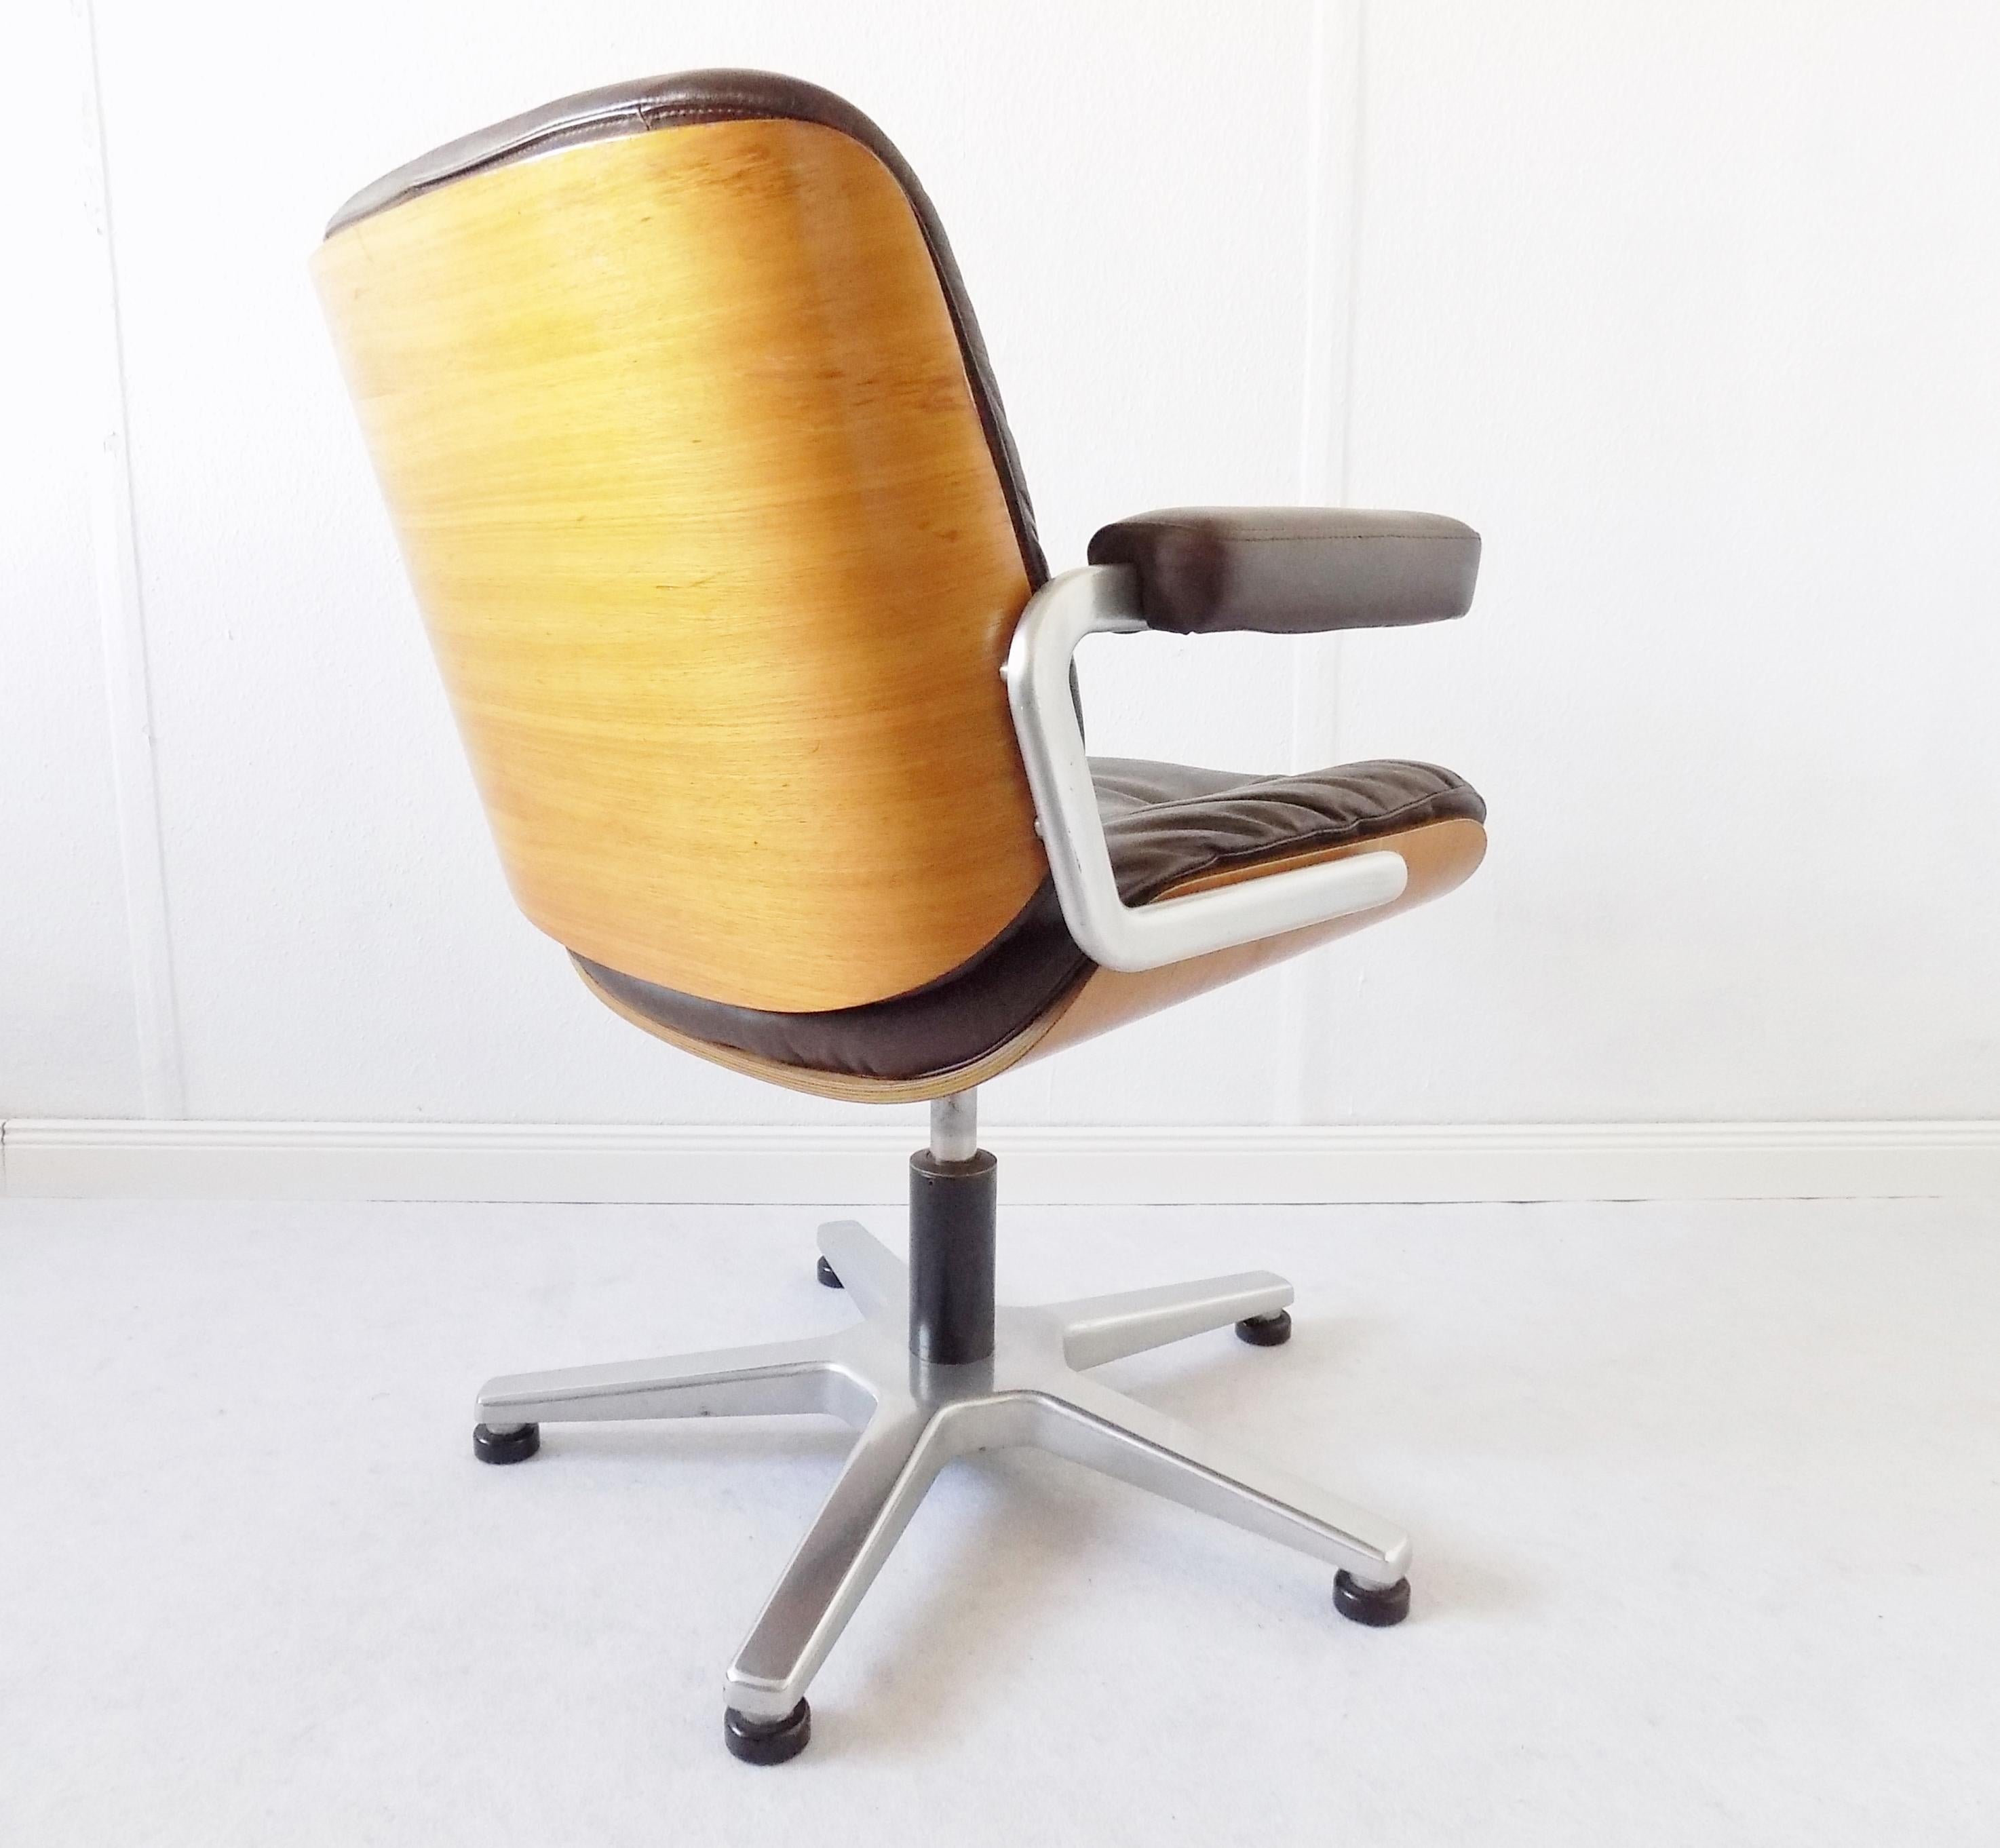 Stoll Giroflex Leather Office Chair by Karl Ditter, Mid-Century Modern, Swivel In Good Condition For Sale In Ludwigslust, Mecklenburg-Vorpommern